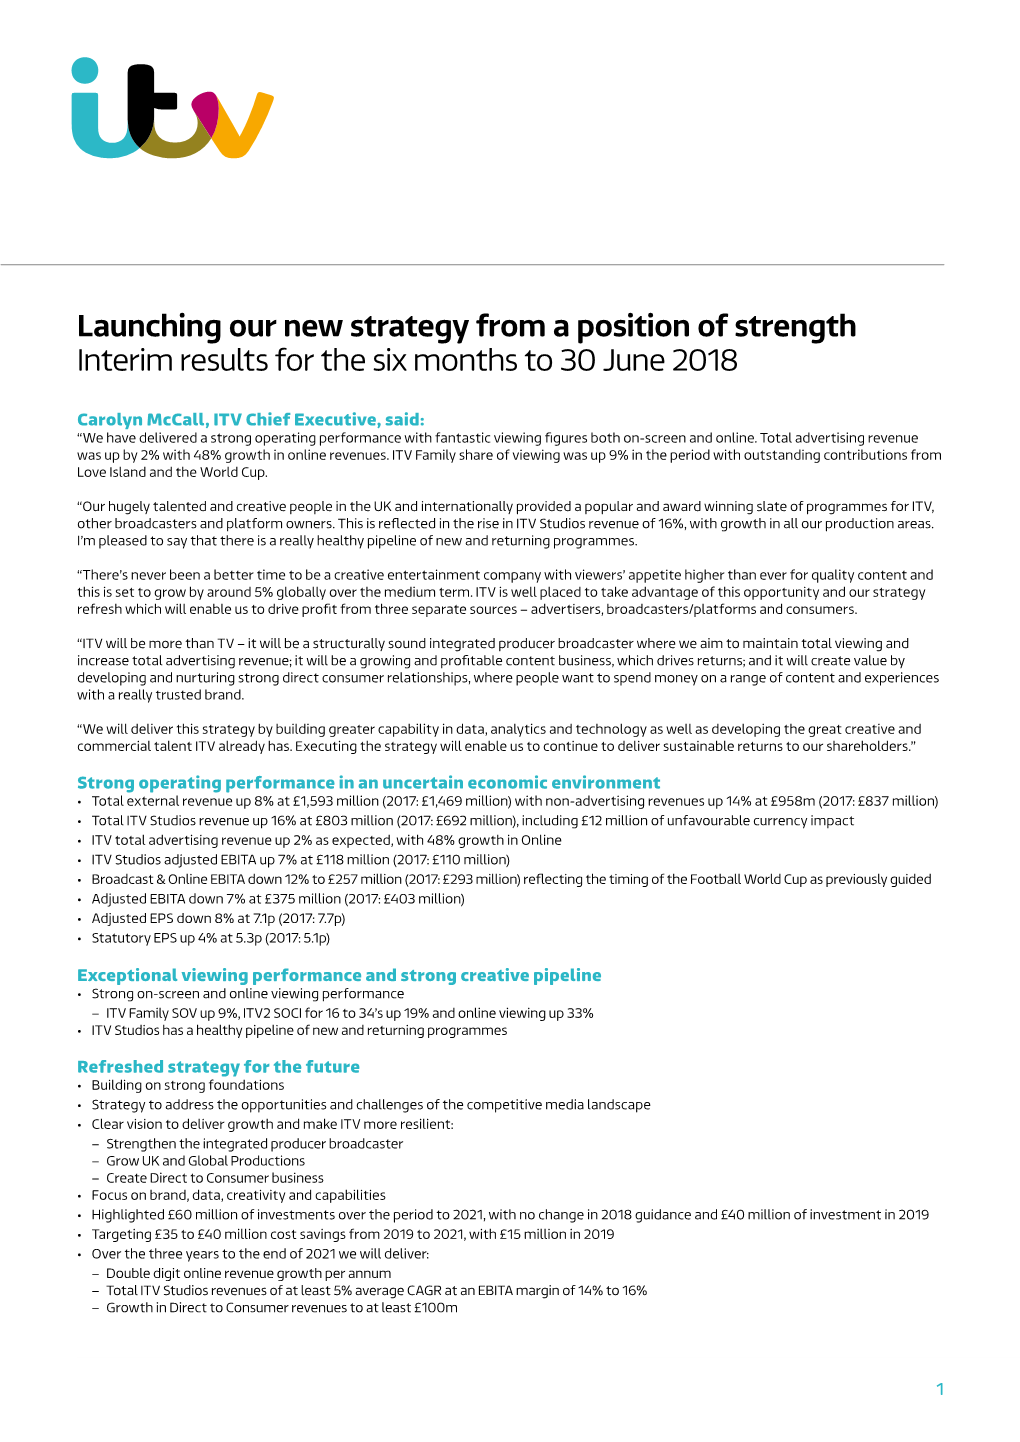 Launching Our New Strategy from a Position of Strength Interim Results for the Six Months to 30 June 2018